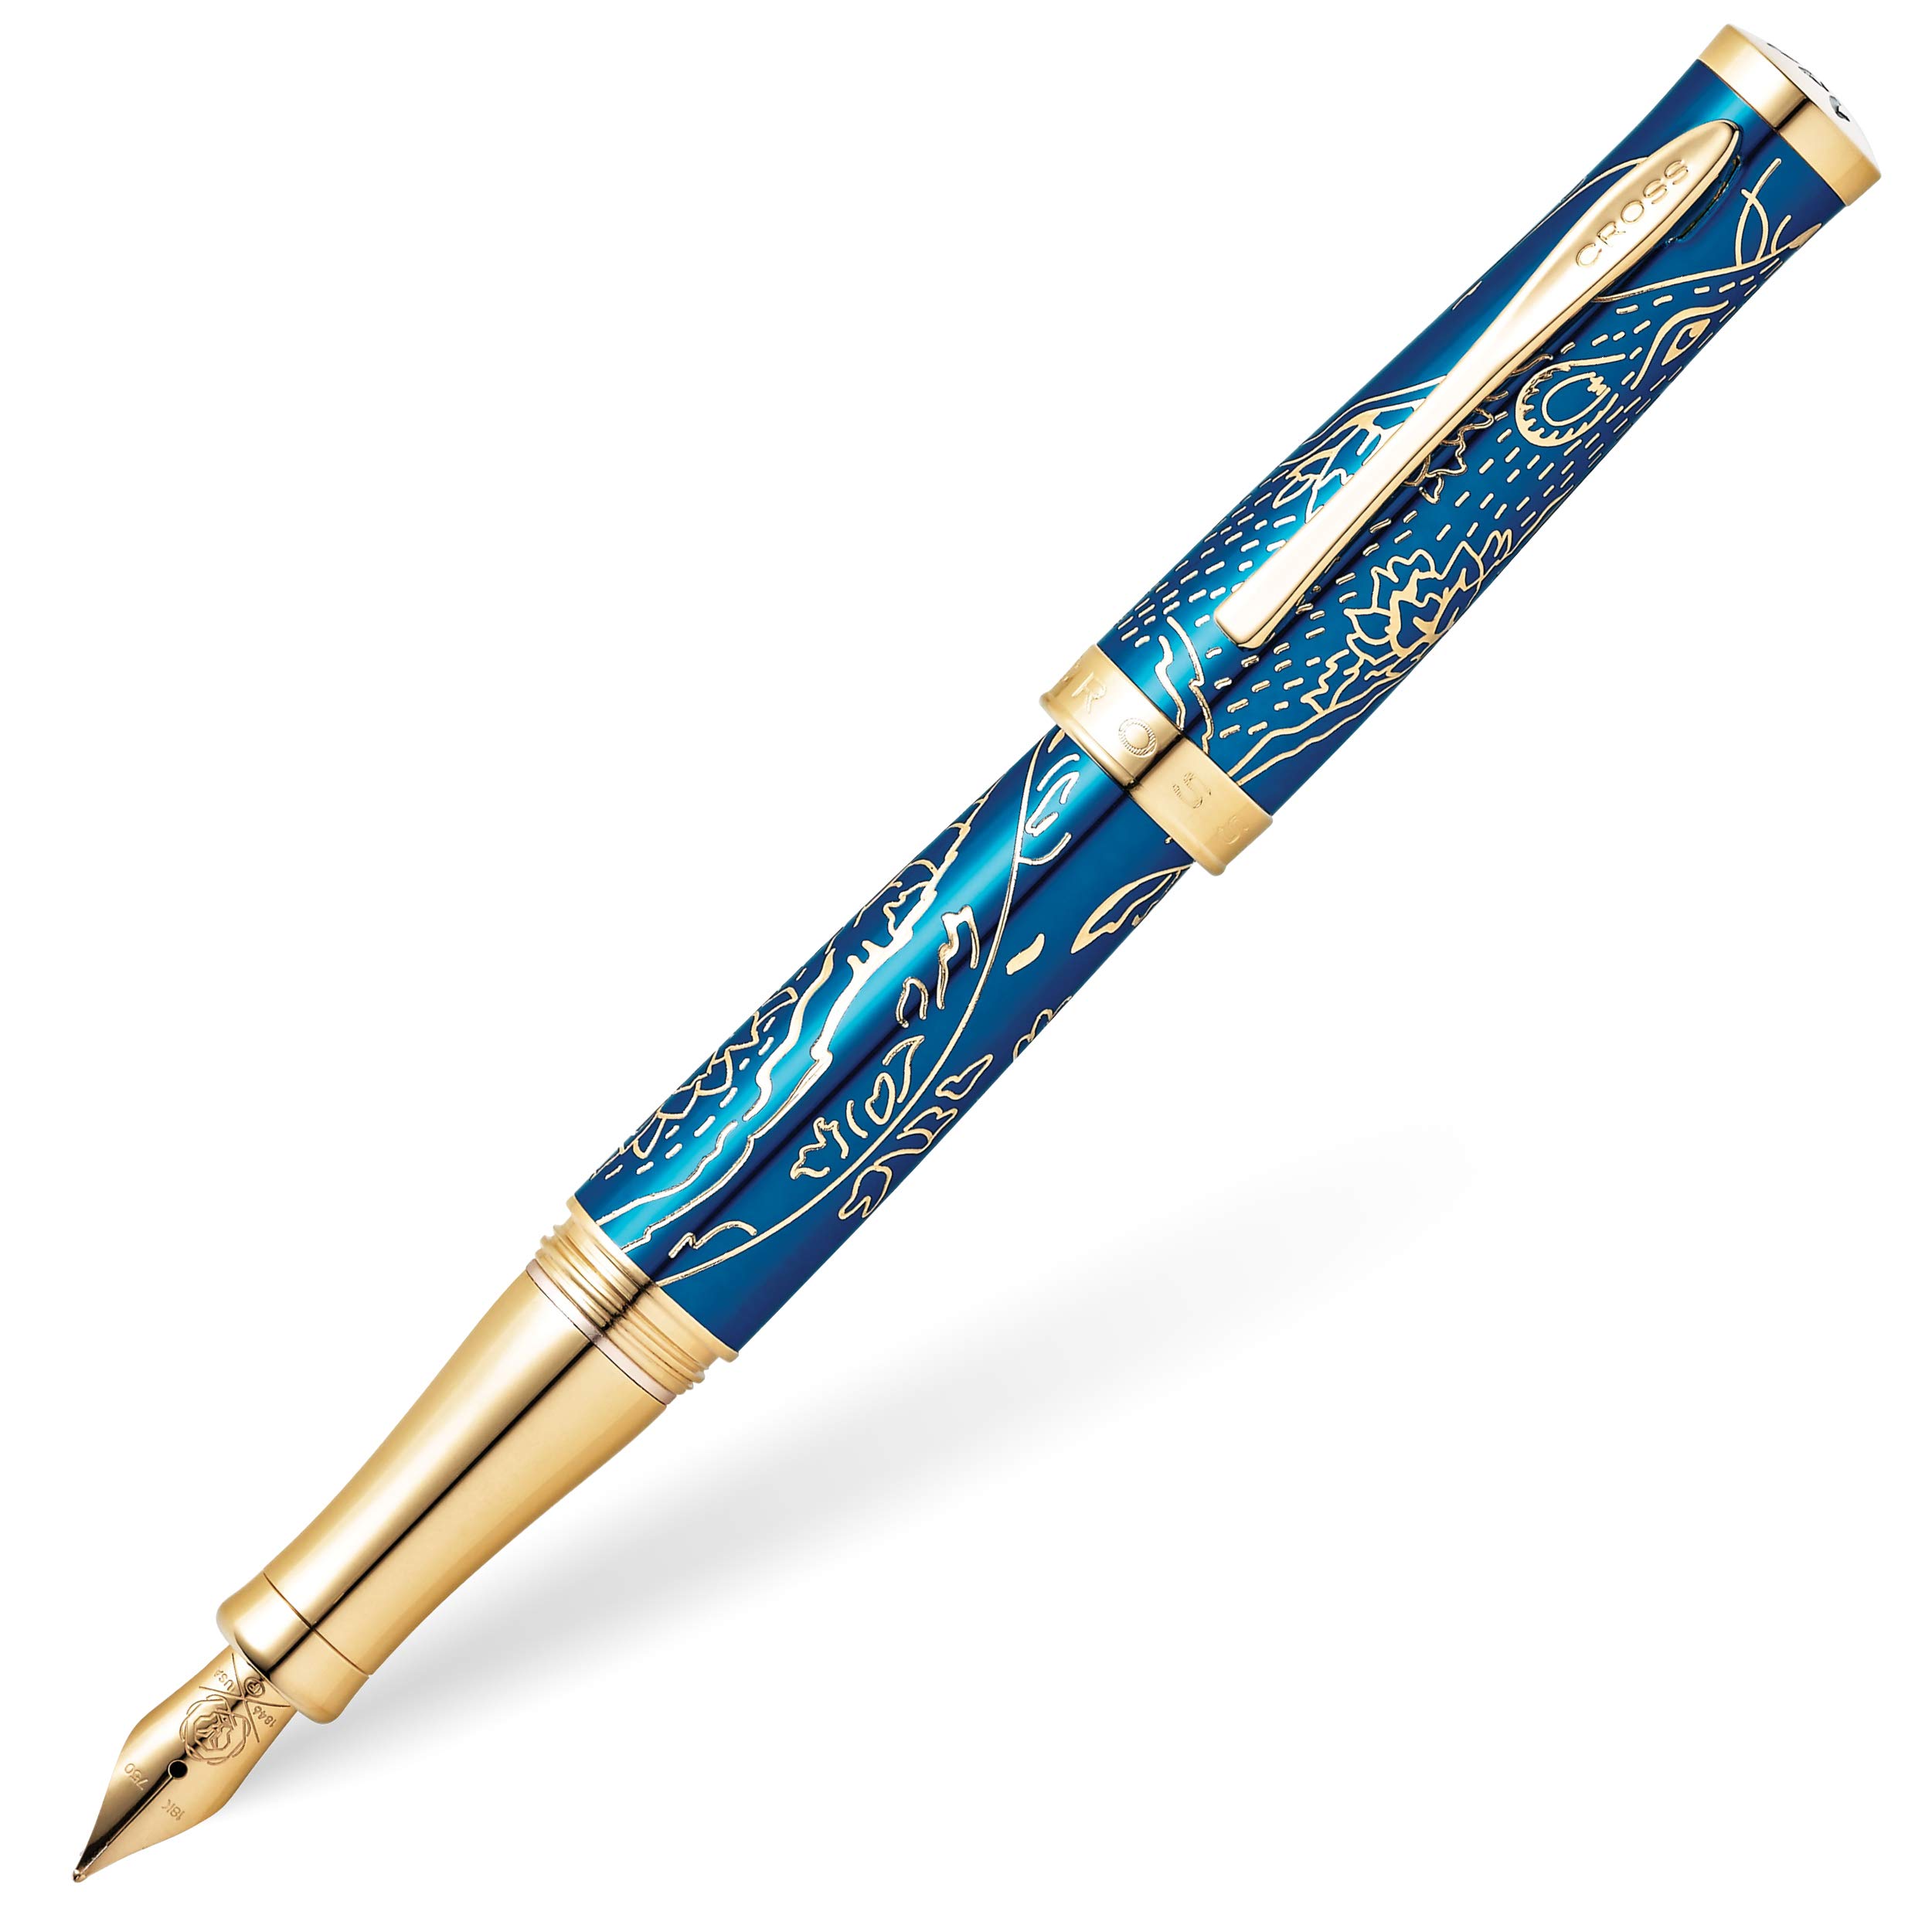 Cross Sauvage 2020 Year of the Rat Special Edition Translucent Blue Lacquer w/23KT Gold Plated Inlays and Appointments Medium Nib Fountain Pen